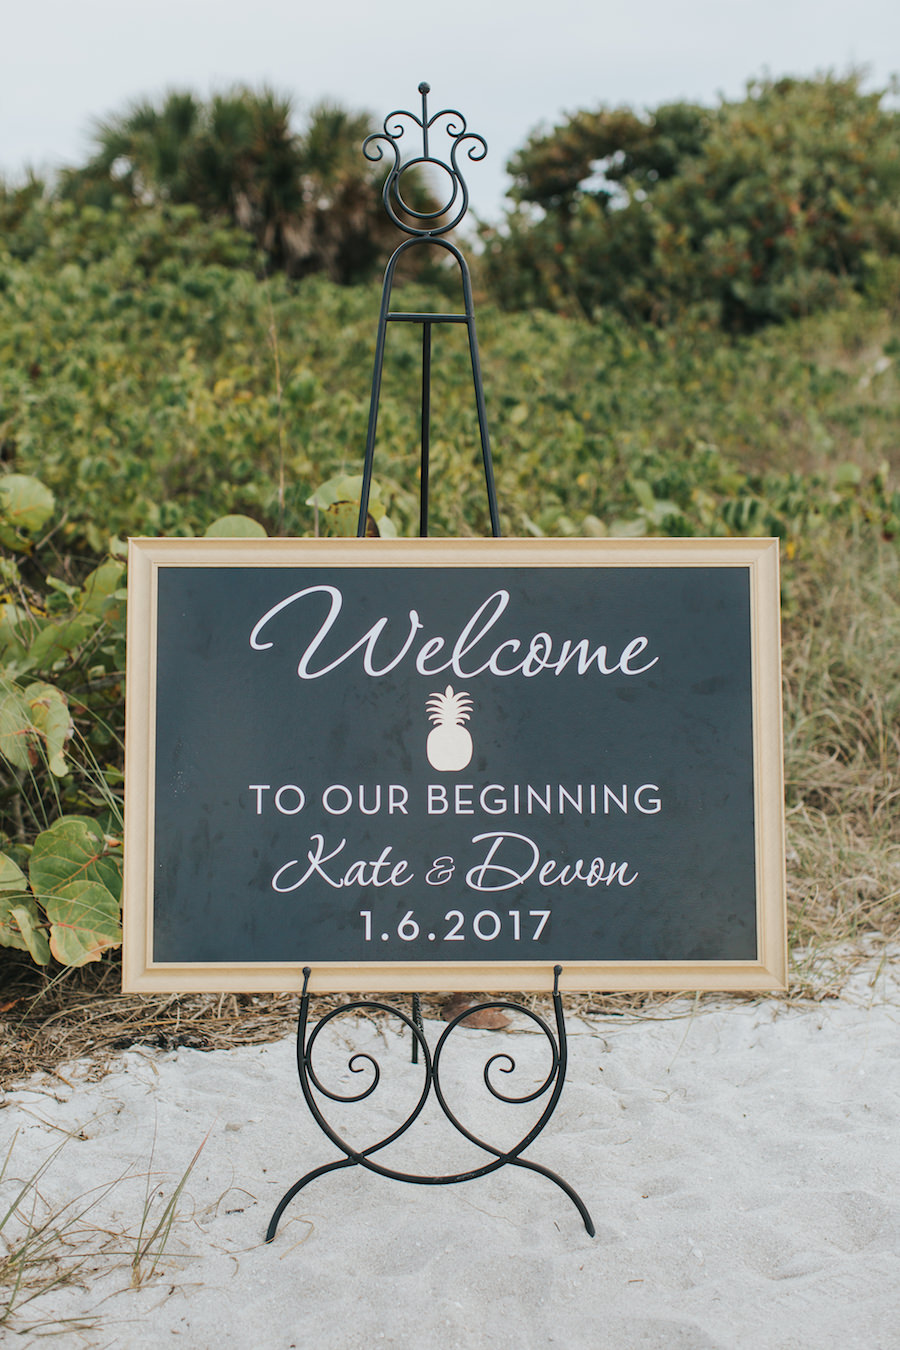 Wedding Ceremony Welcome Sign on Black Chalkboard with White Writing and Gold Pineapple Accent | Sarasota Wedding Planner Jennifer Matteo Event Planning